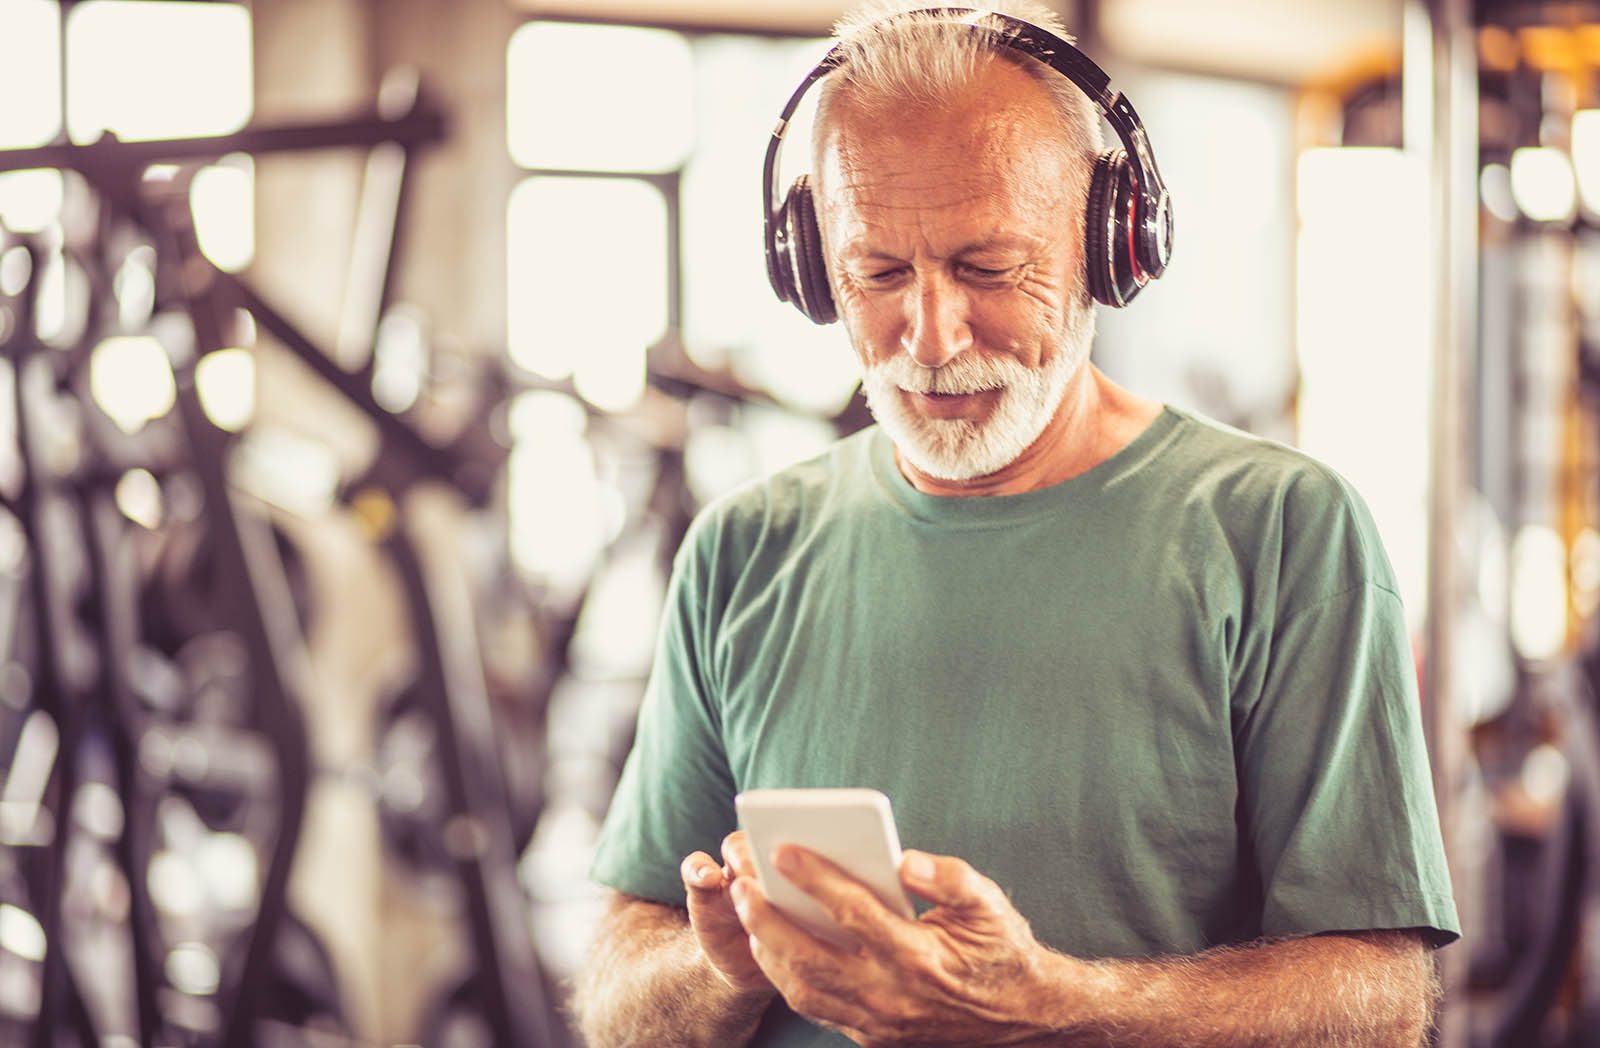 How to prevent hearing loss as we get older